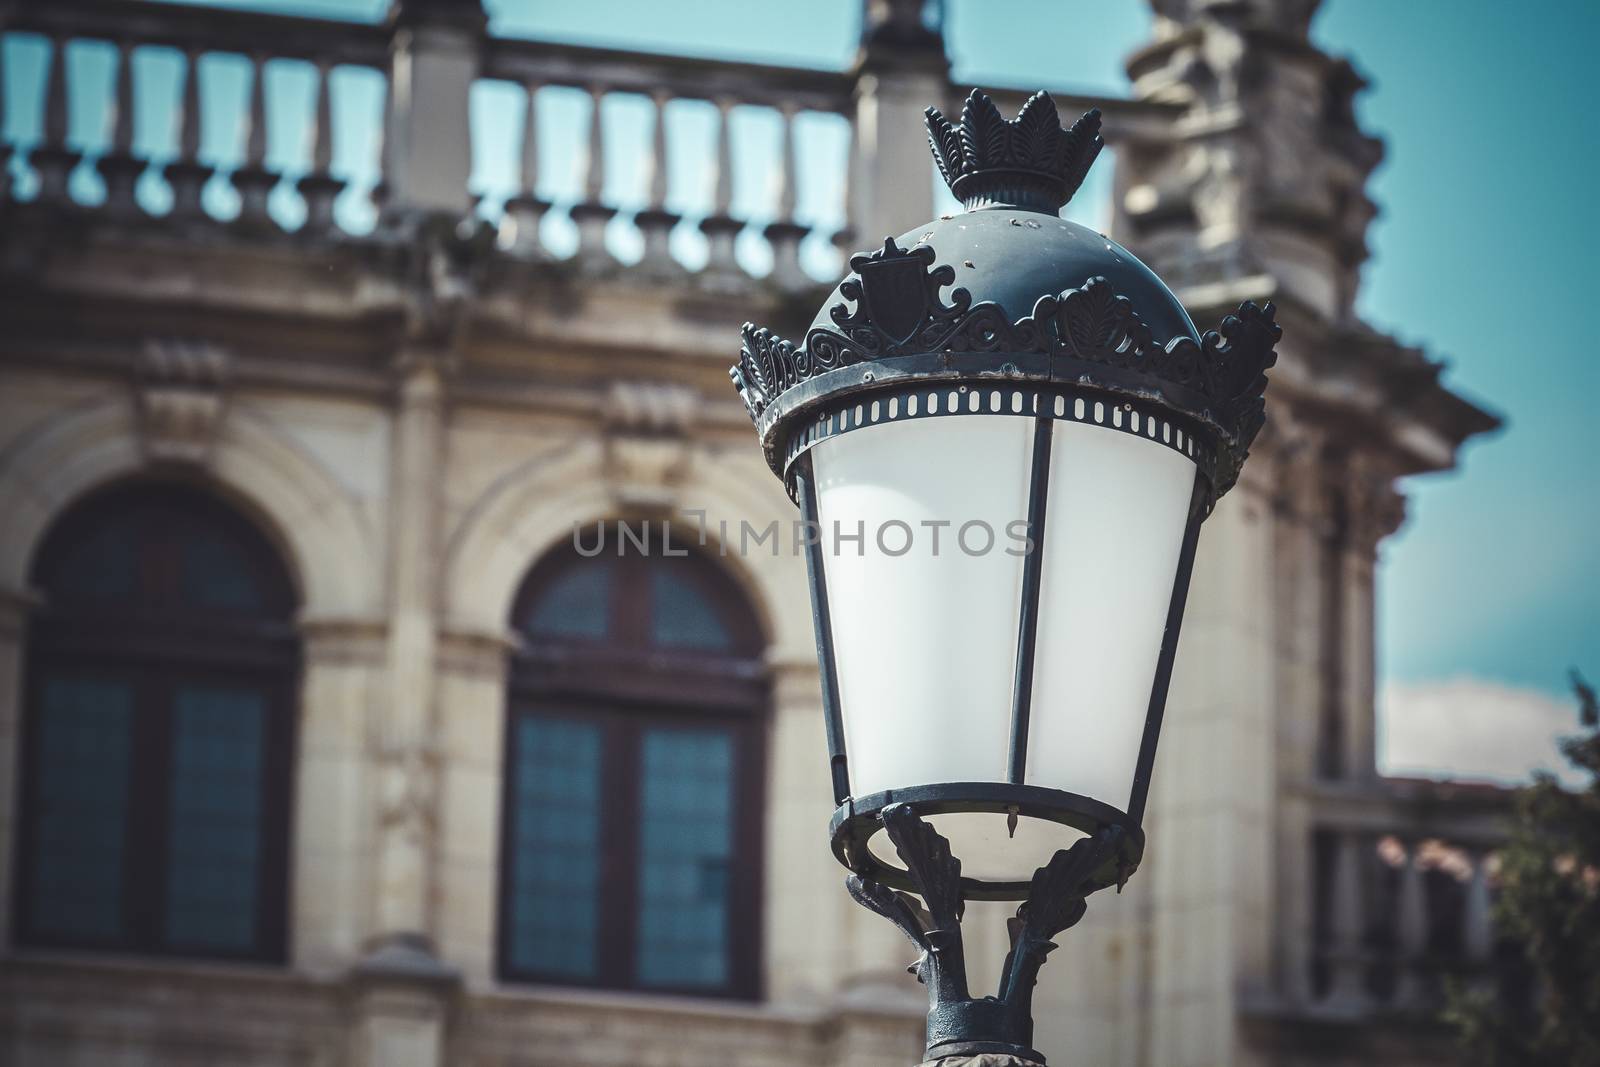 traditional street lamp with decorative metal flourishes by FernandoCortes